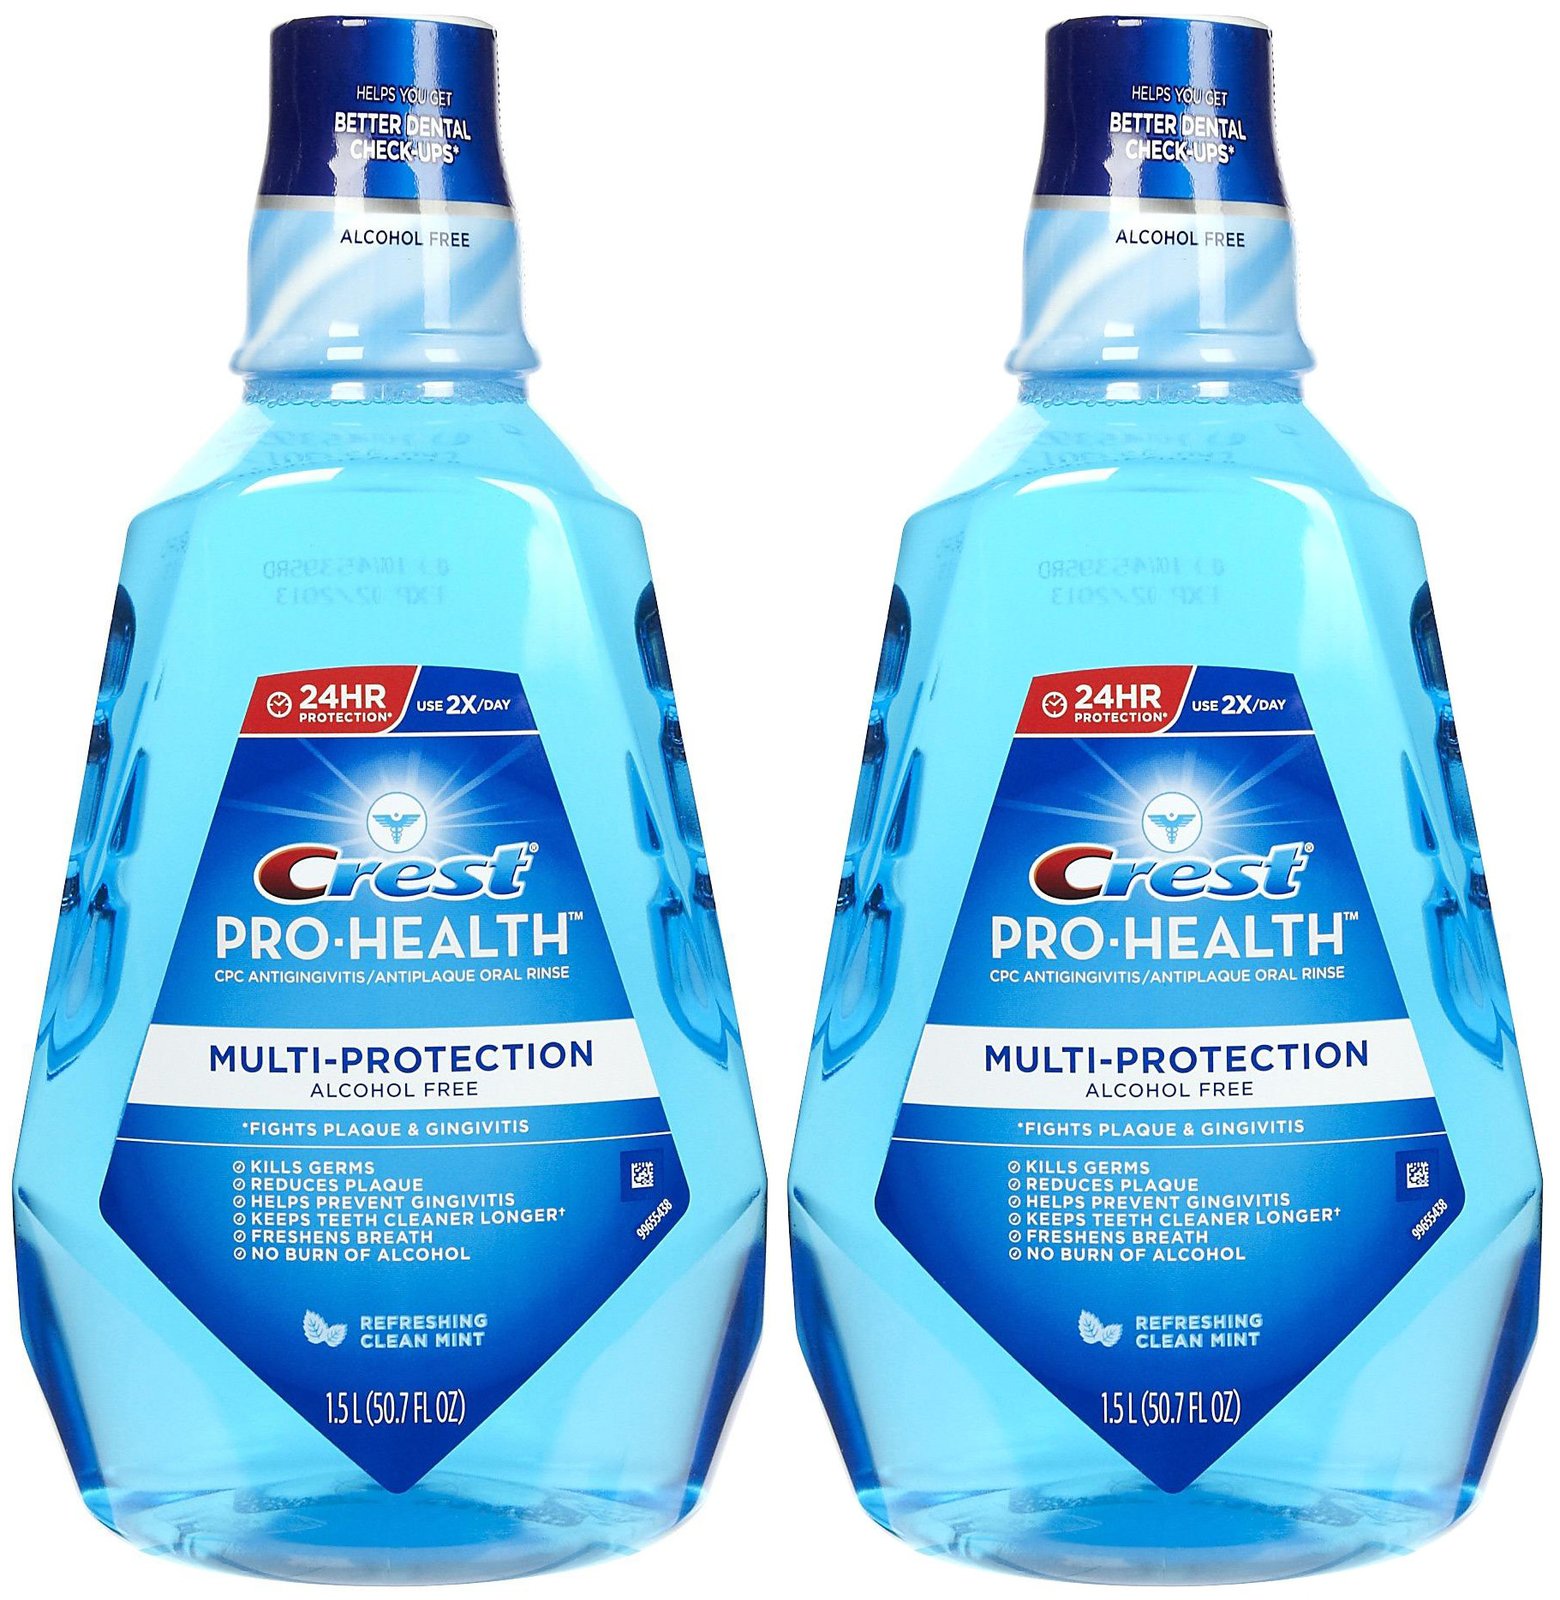 Crest Pro-Health Mouth Rinse Only $1.14 at Target